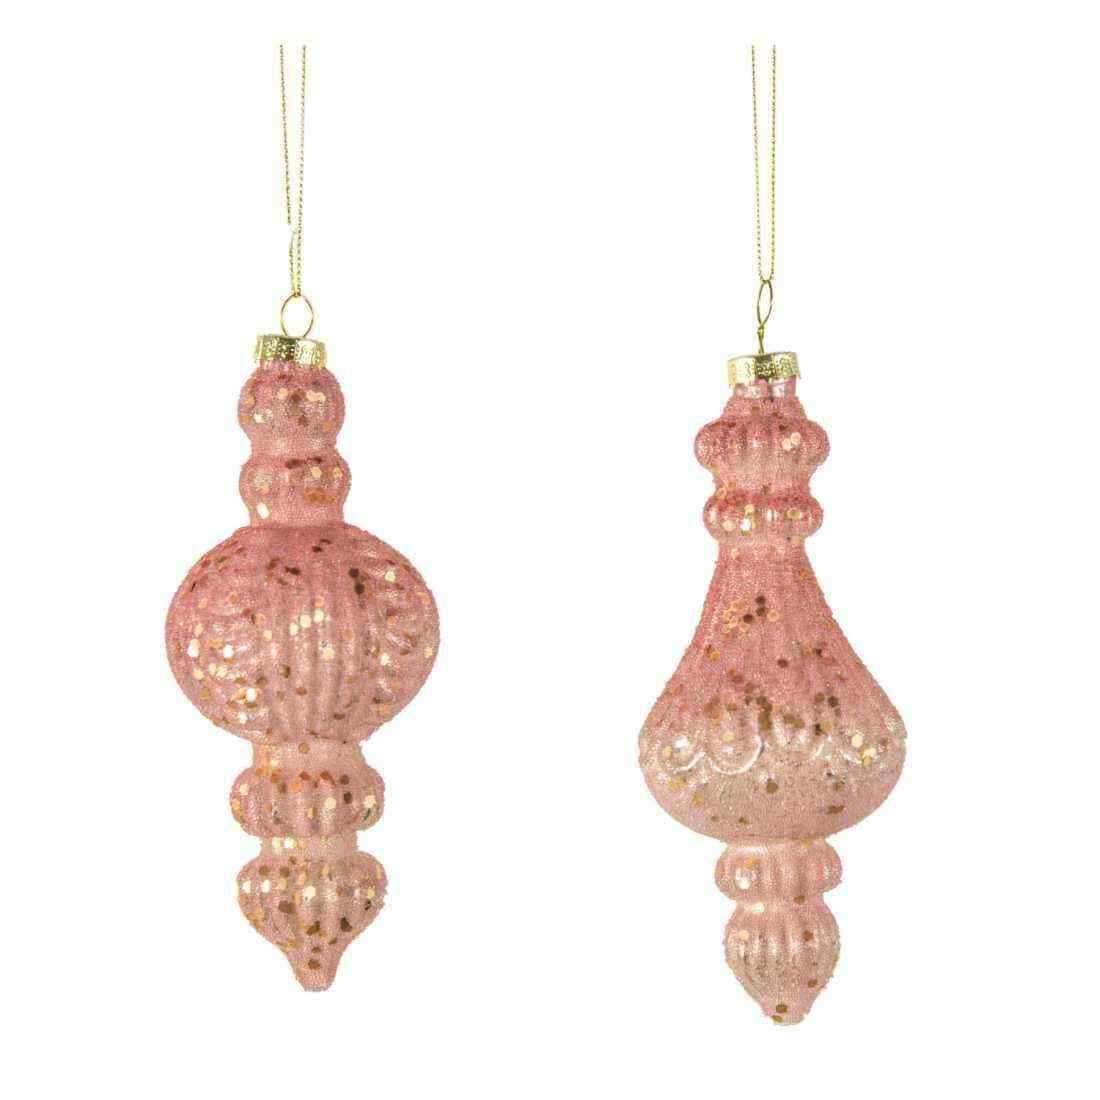 Blush Pink Ornate Droplet Assorted Baubles Set of 6 - The Farthing